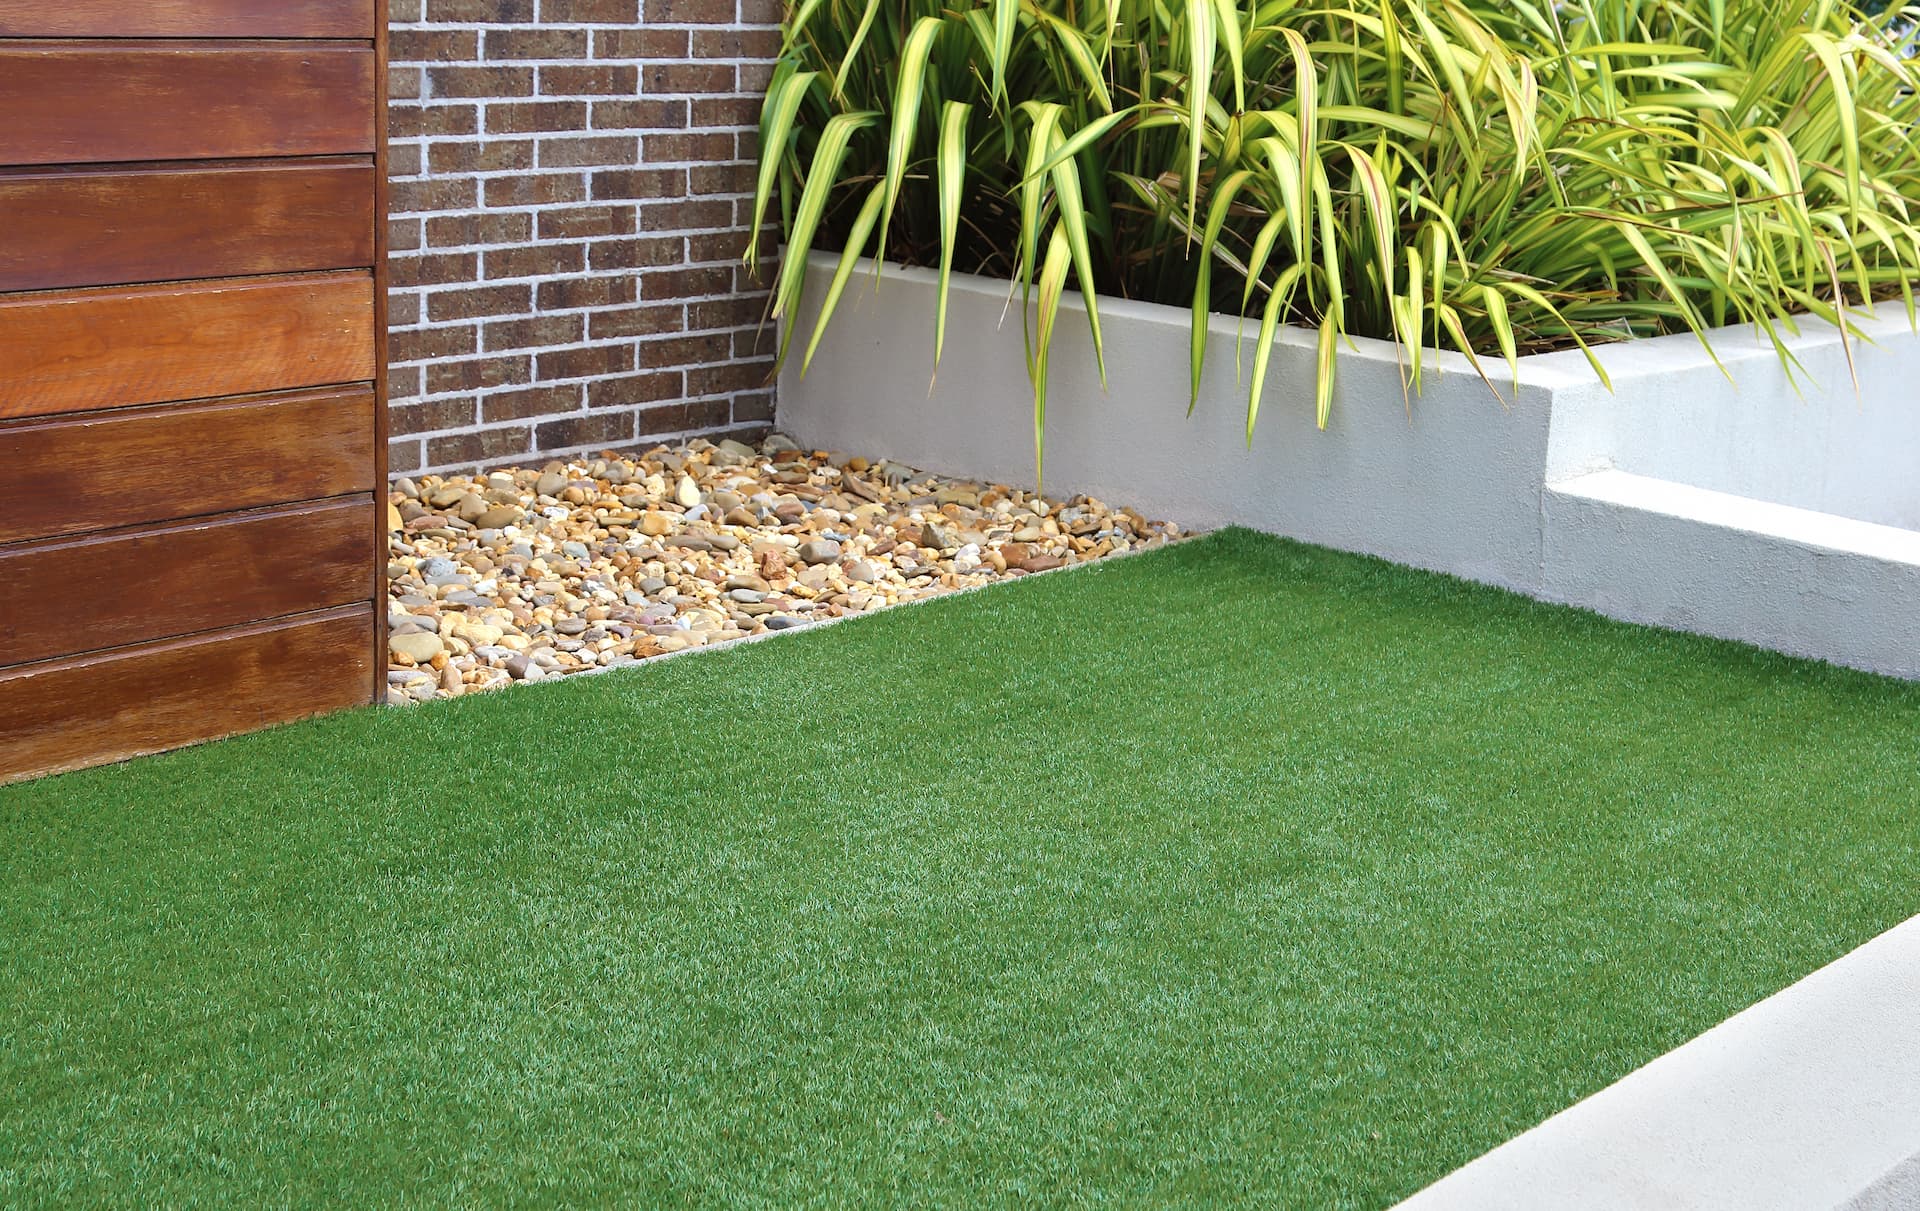 Licenced Artificial Grass & Turf services in Newhey